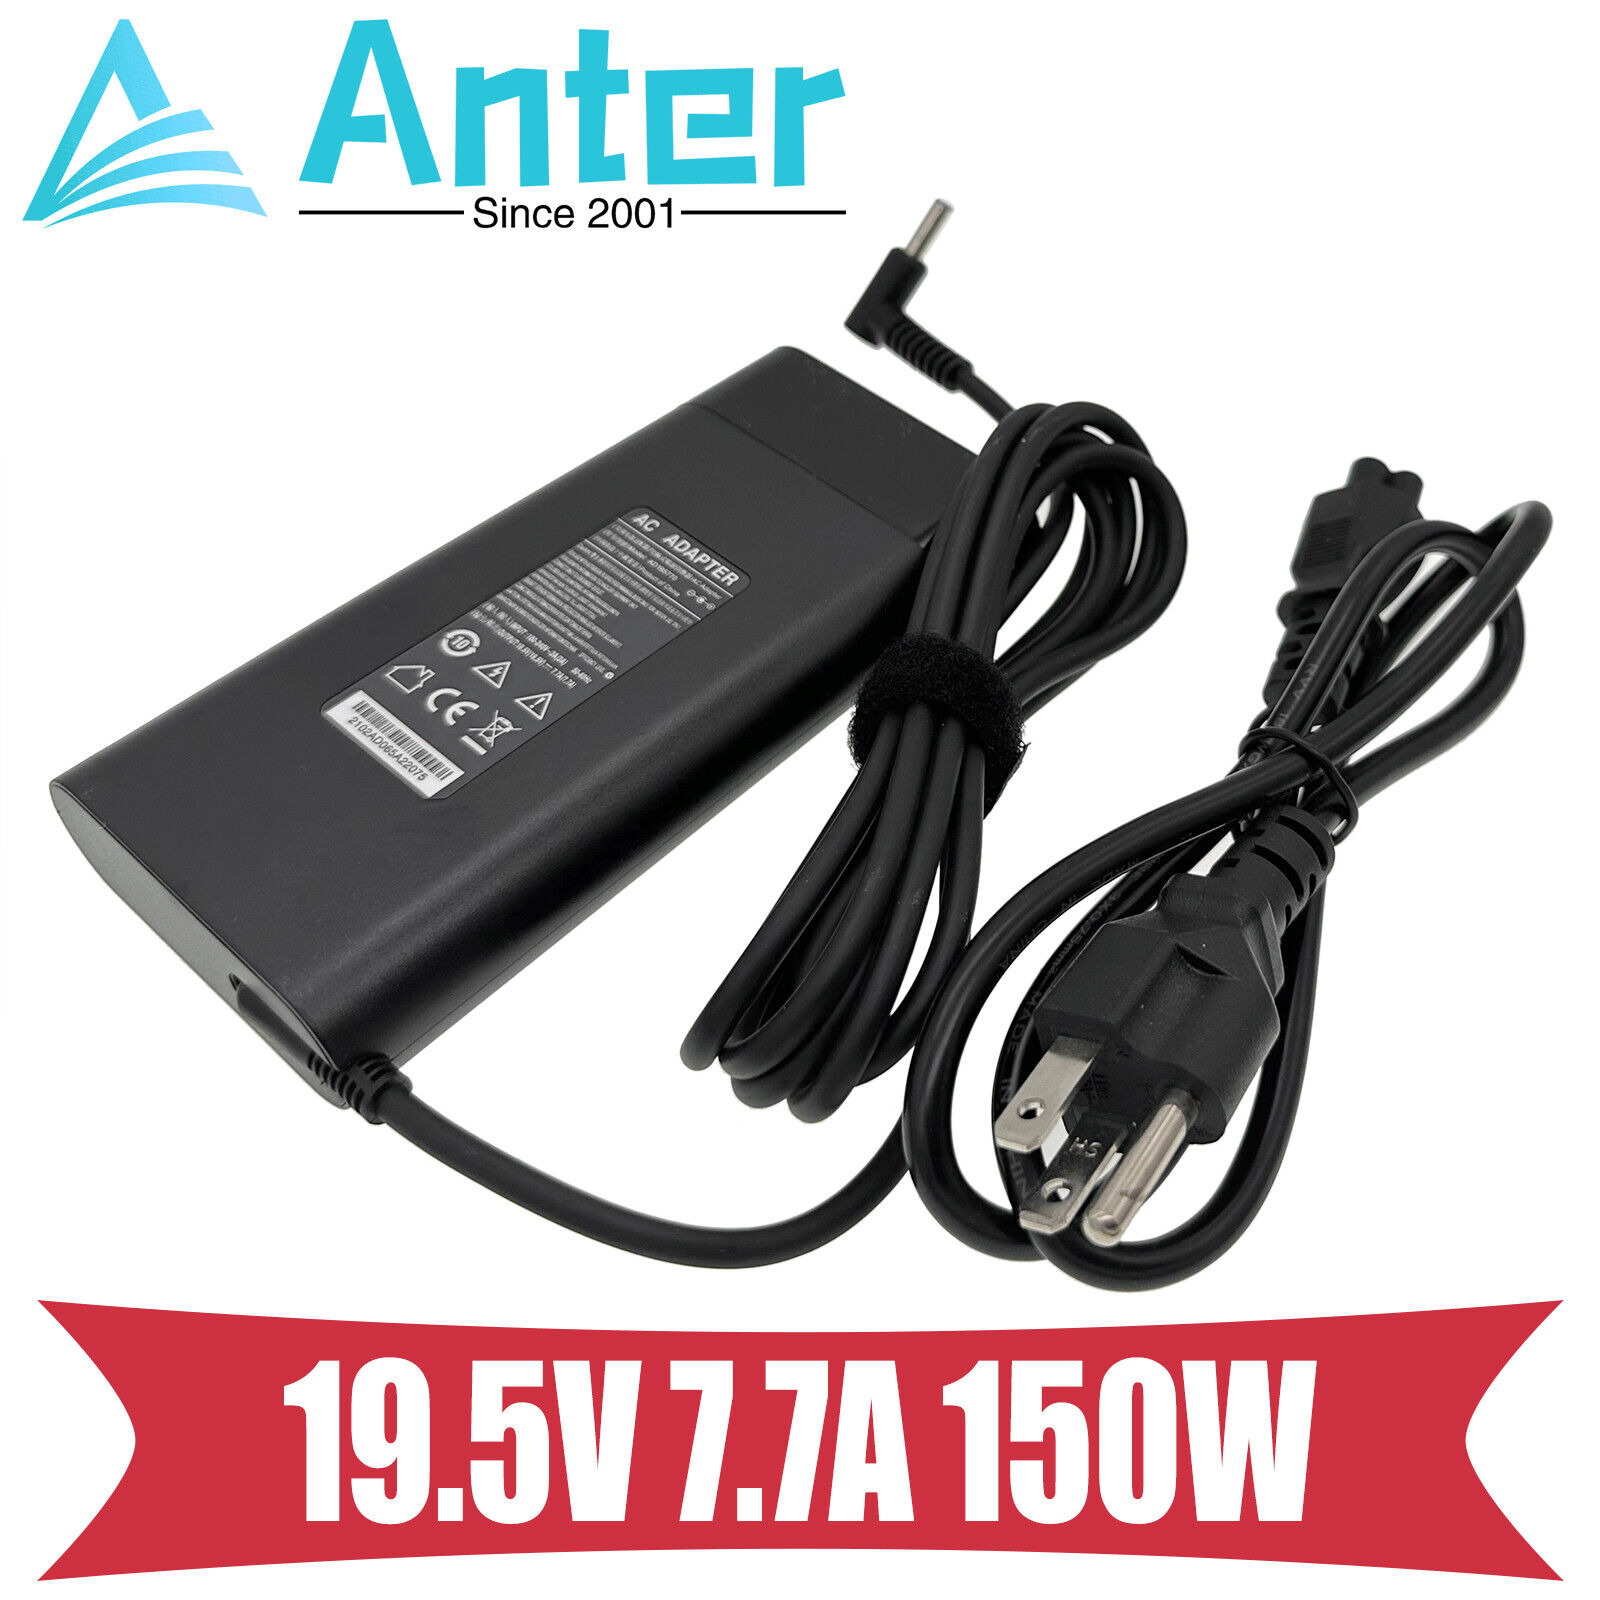 150W 19.5V 7.7A Laptop Charger Power AC Adapter For HP OMEN ZBook 15 G3 G4 G5 G6